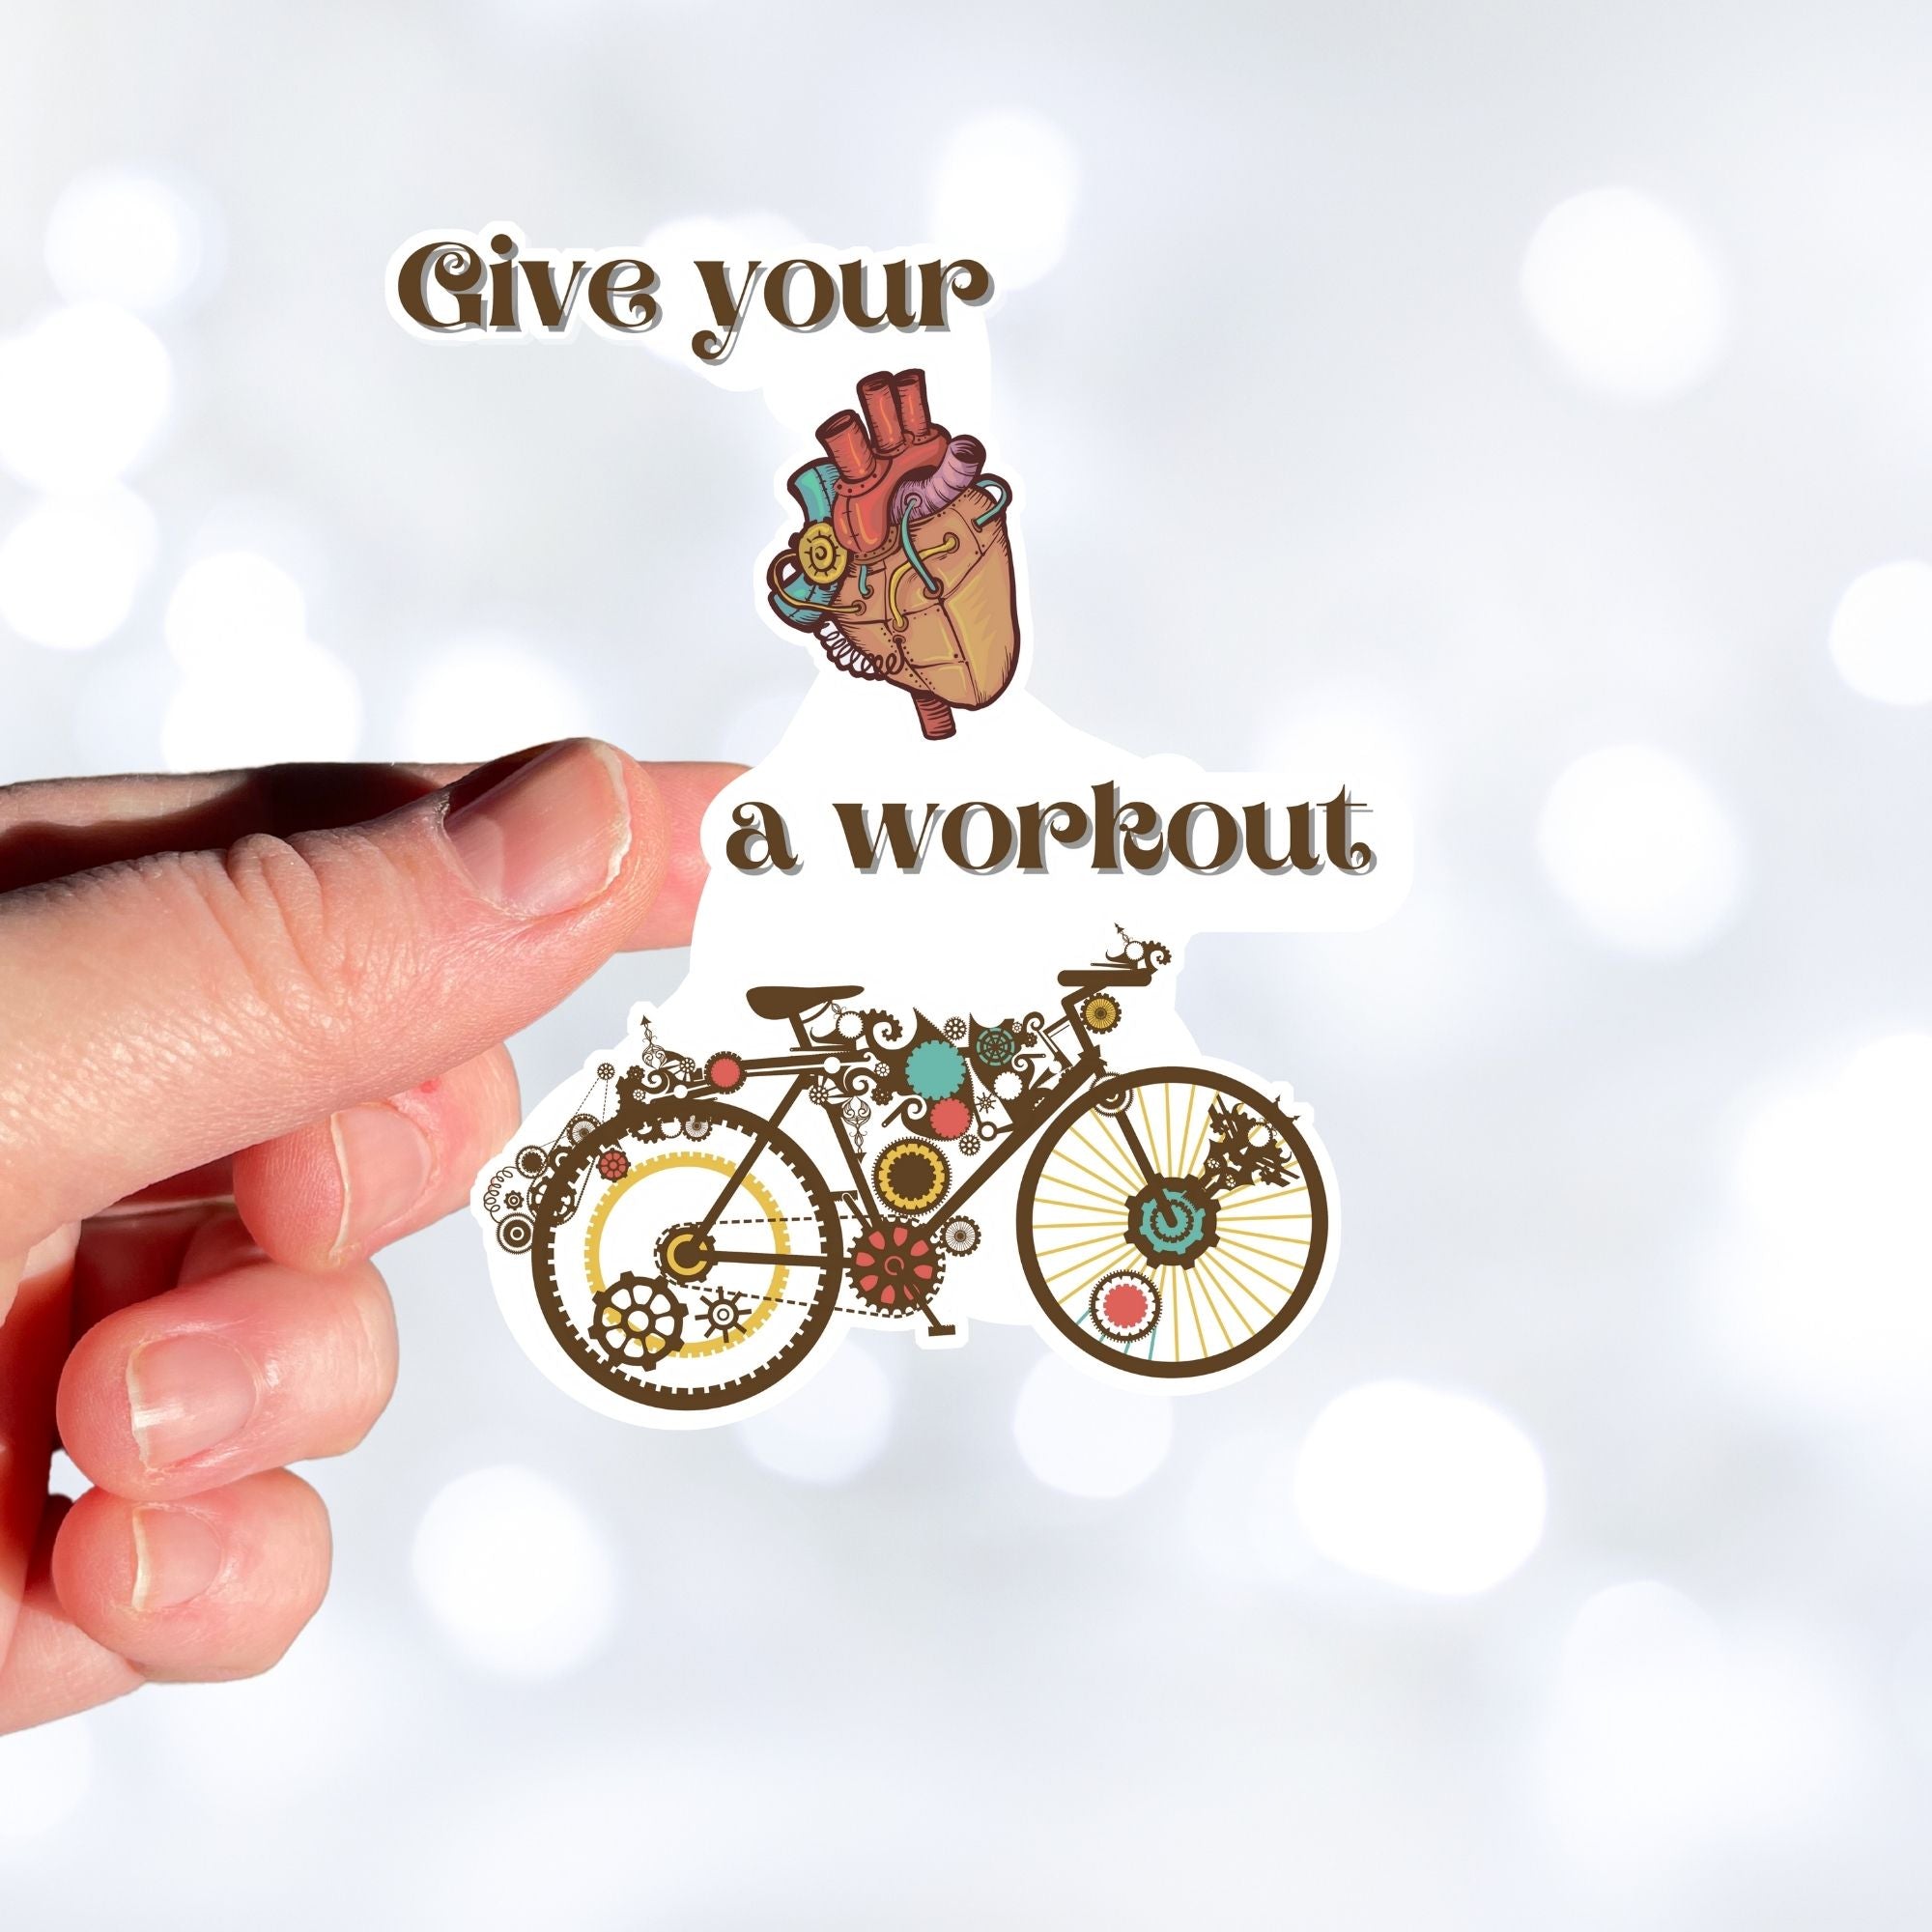 Give your heart a workout! This steampunk sticker has a steampunk anatomic heart and a steampunk bicycle. This image shows a hand holding the steampunk bicycle sticker.